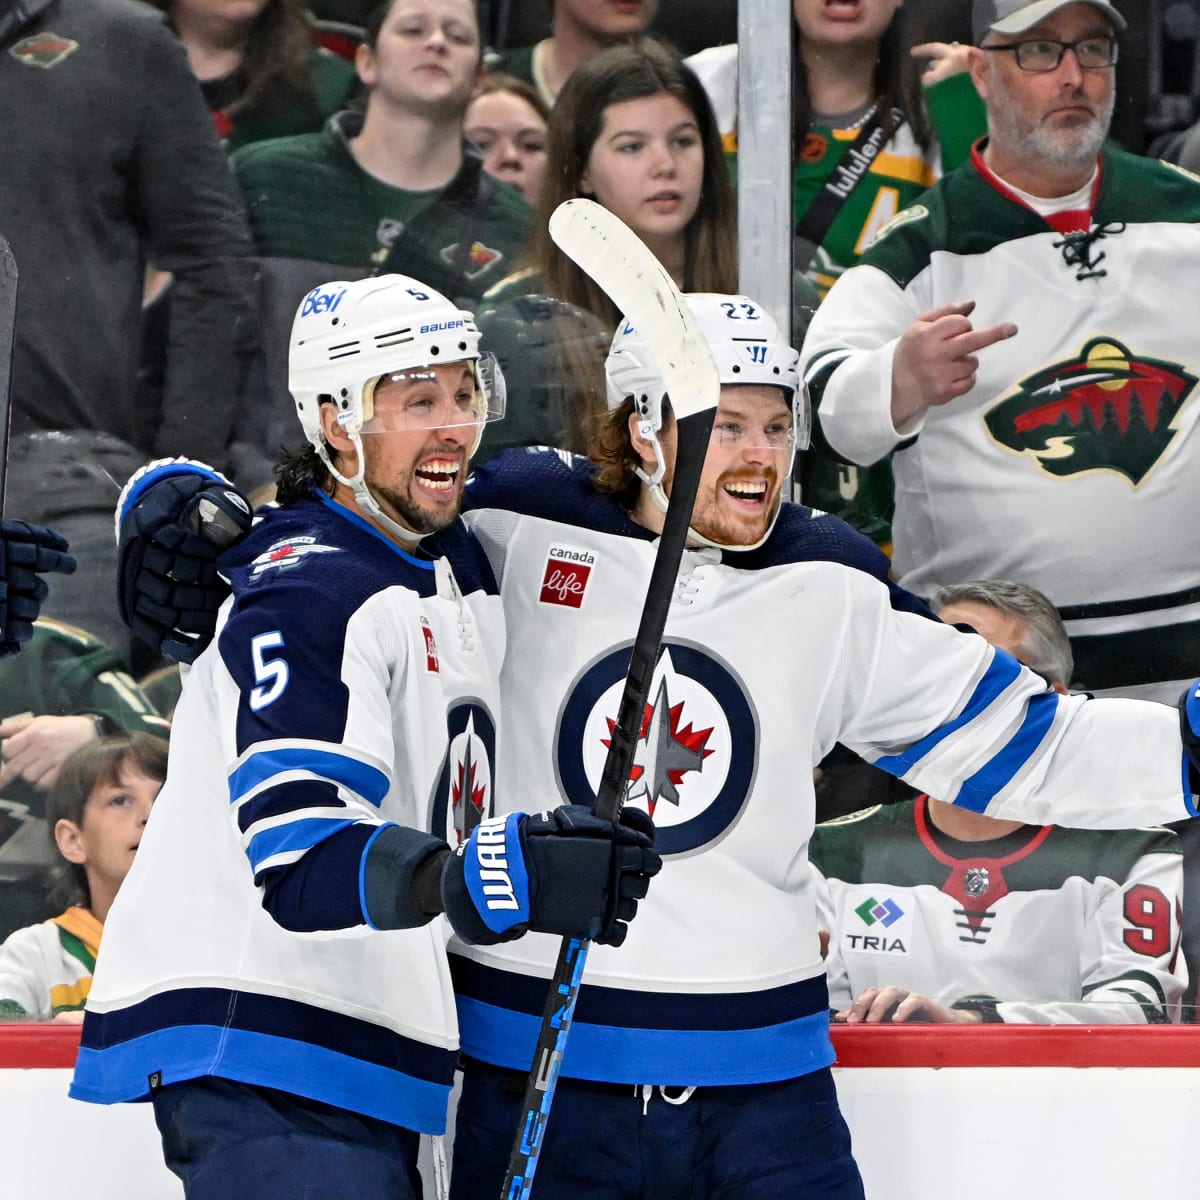 Wheeler, Scheifele with goal and two assists each, Jets beat Flyers 7-3 -  The Globe and Mail